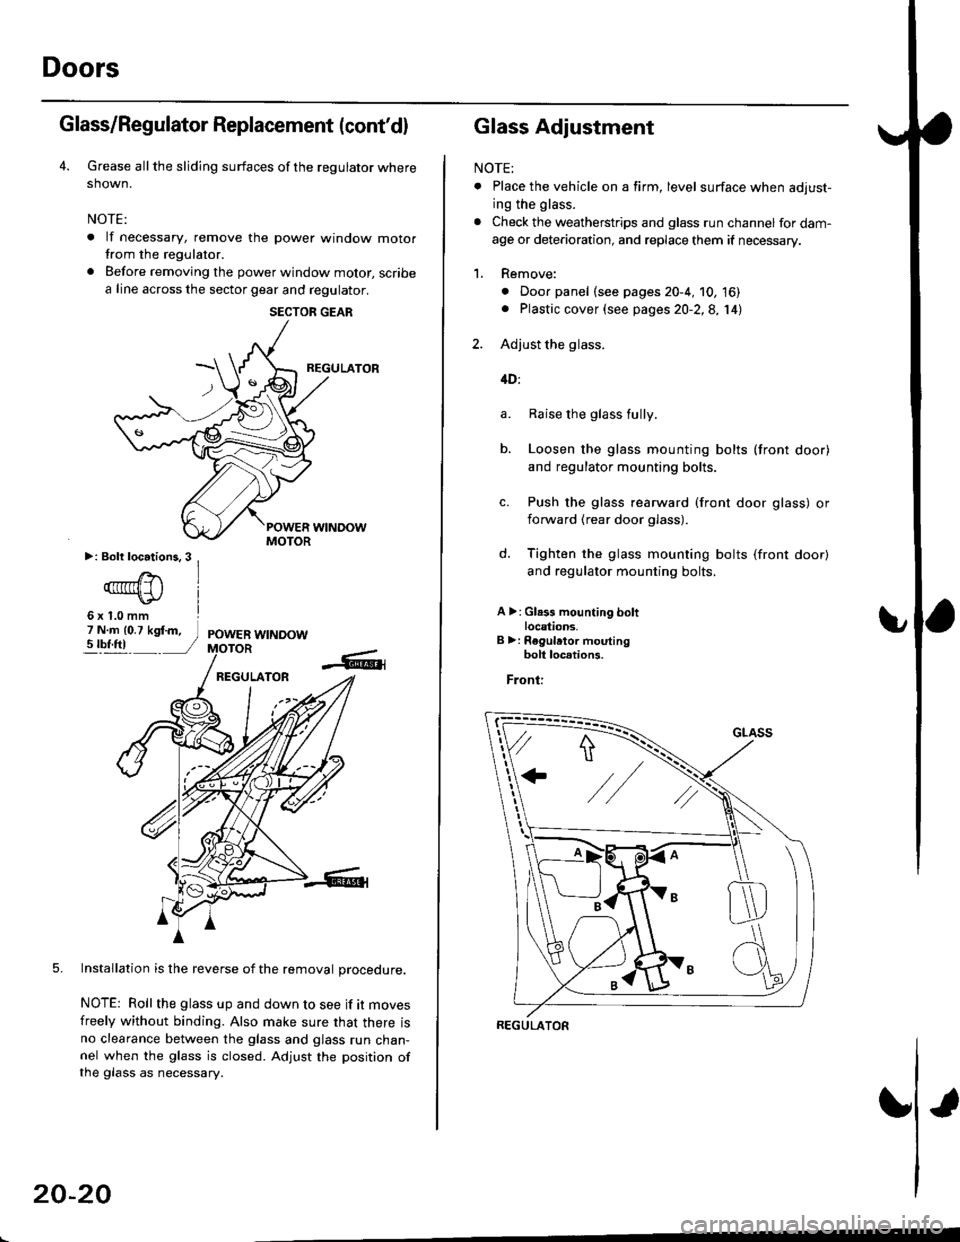 HONDA CIVIC 1999 6.G Workshop Manual Doors
Glass/Regulator Replacement (contdl
Grease all the sliding surfaces of the regulator where
shown.
NOTE:
. lf necessary, remove the power window motorfrom the regulator.
. Before removing the po